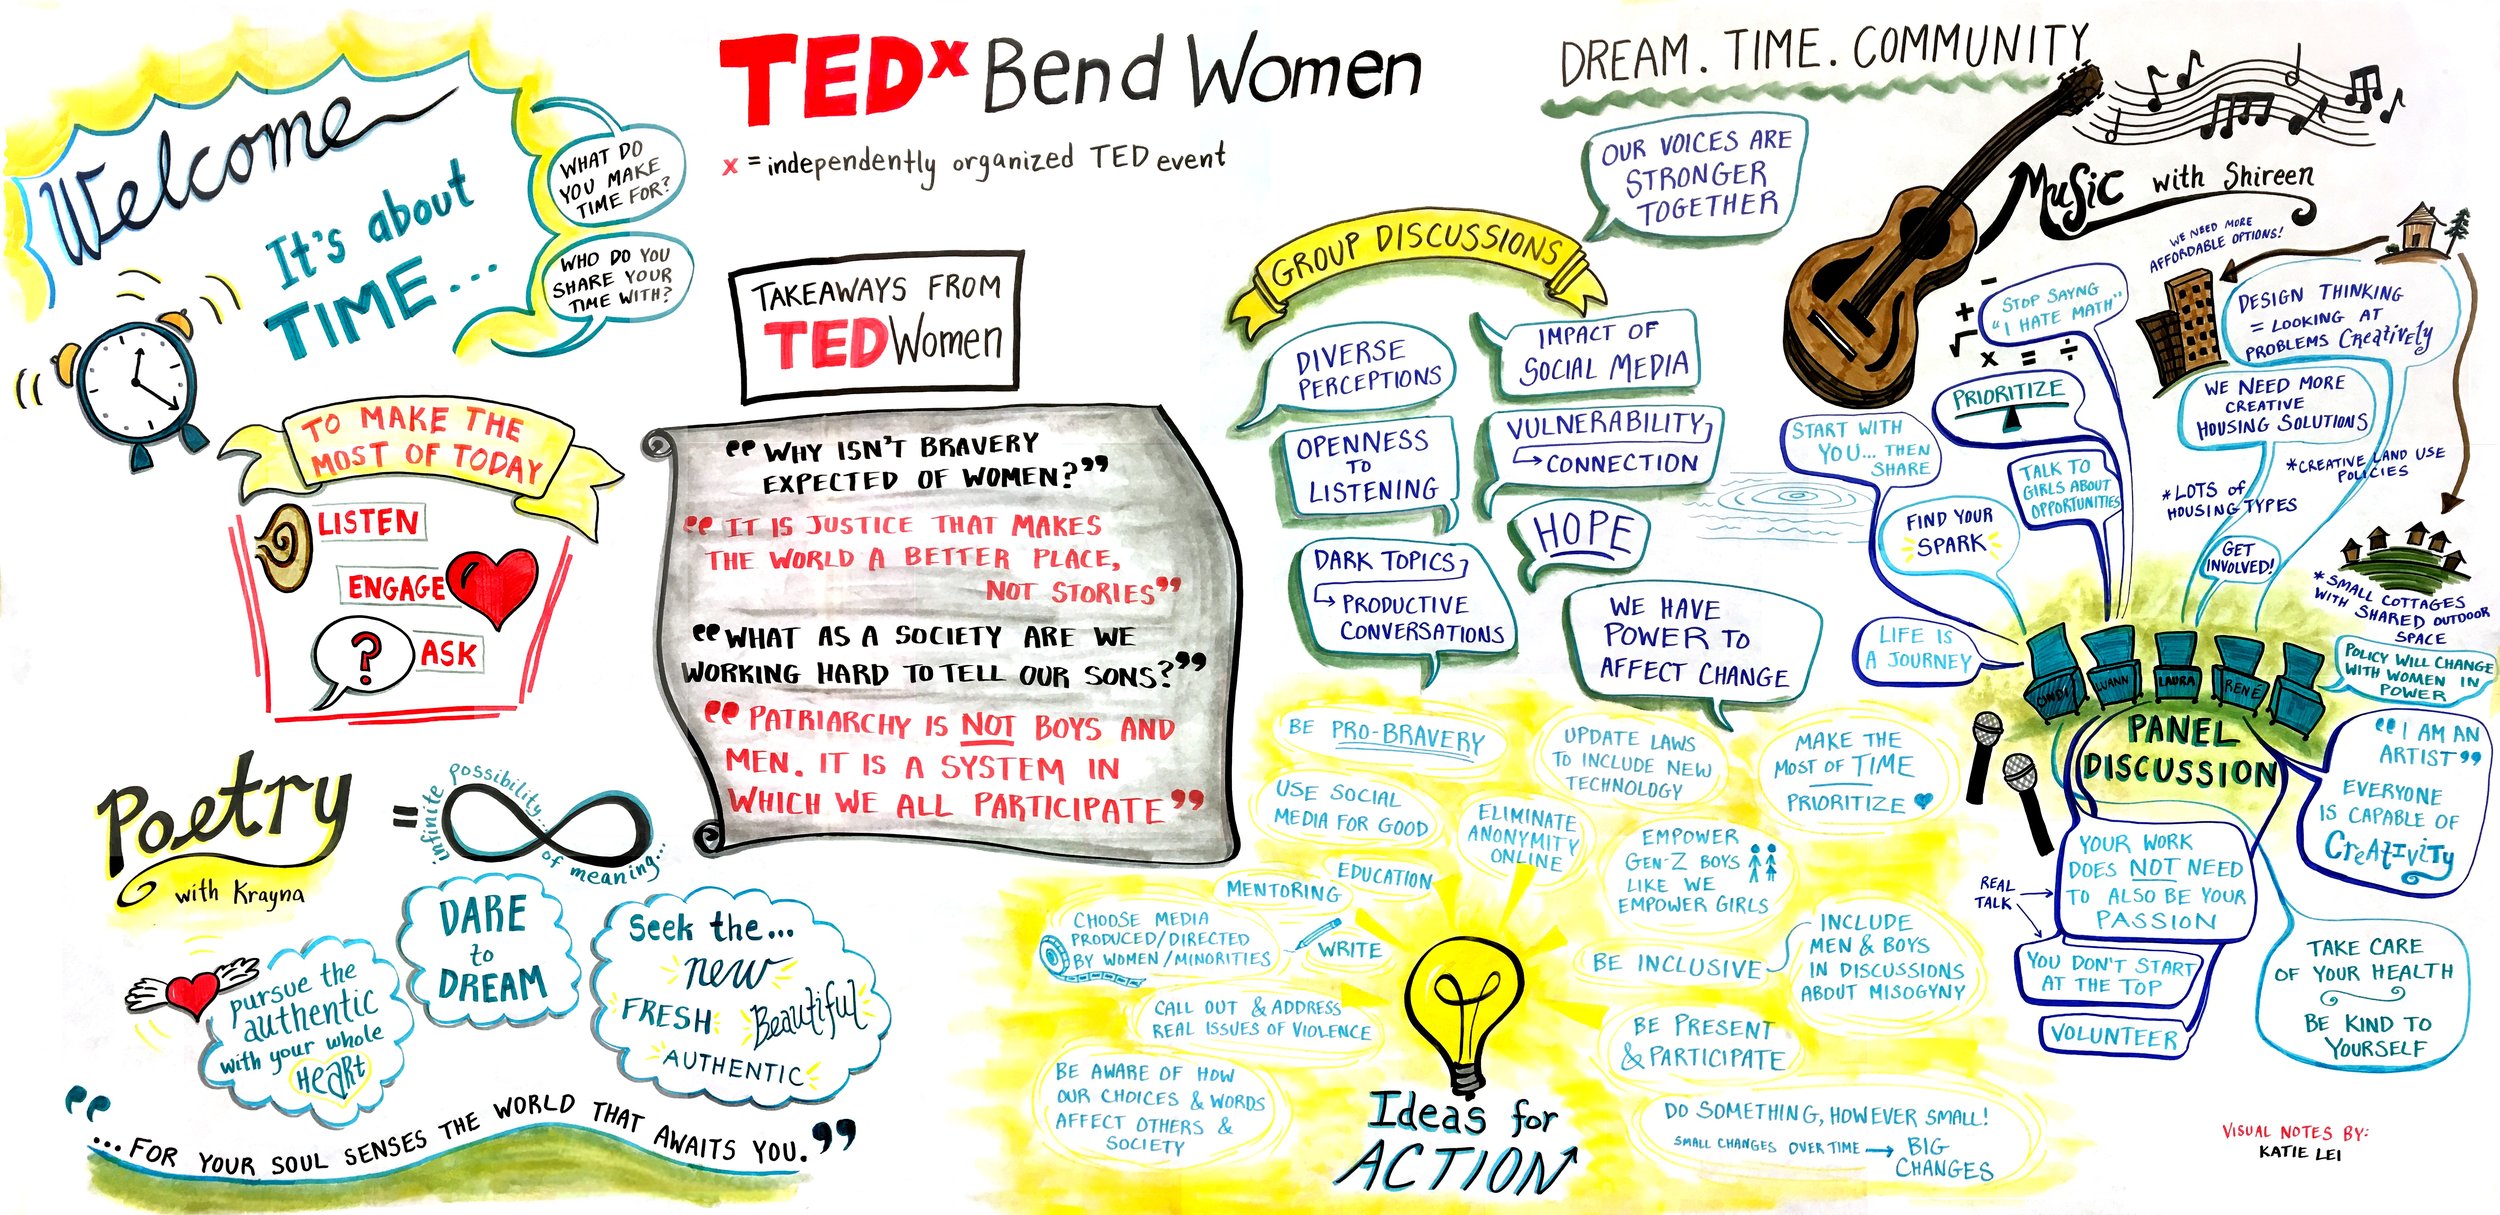 Visual Notes by Katie Lei for TEDxBendWomen 2016